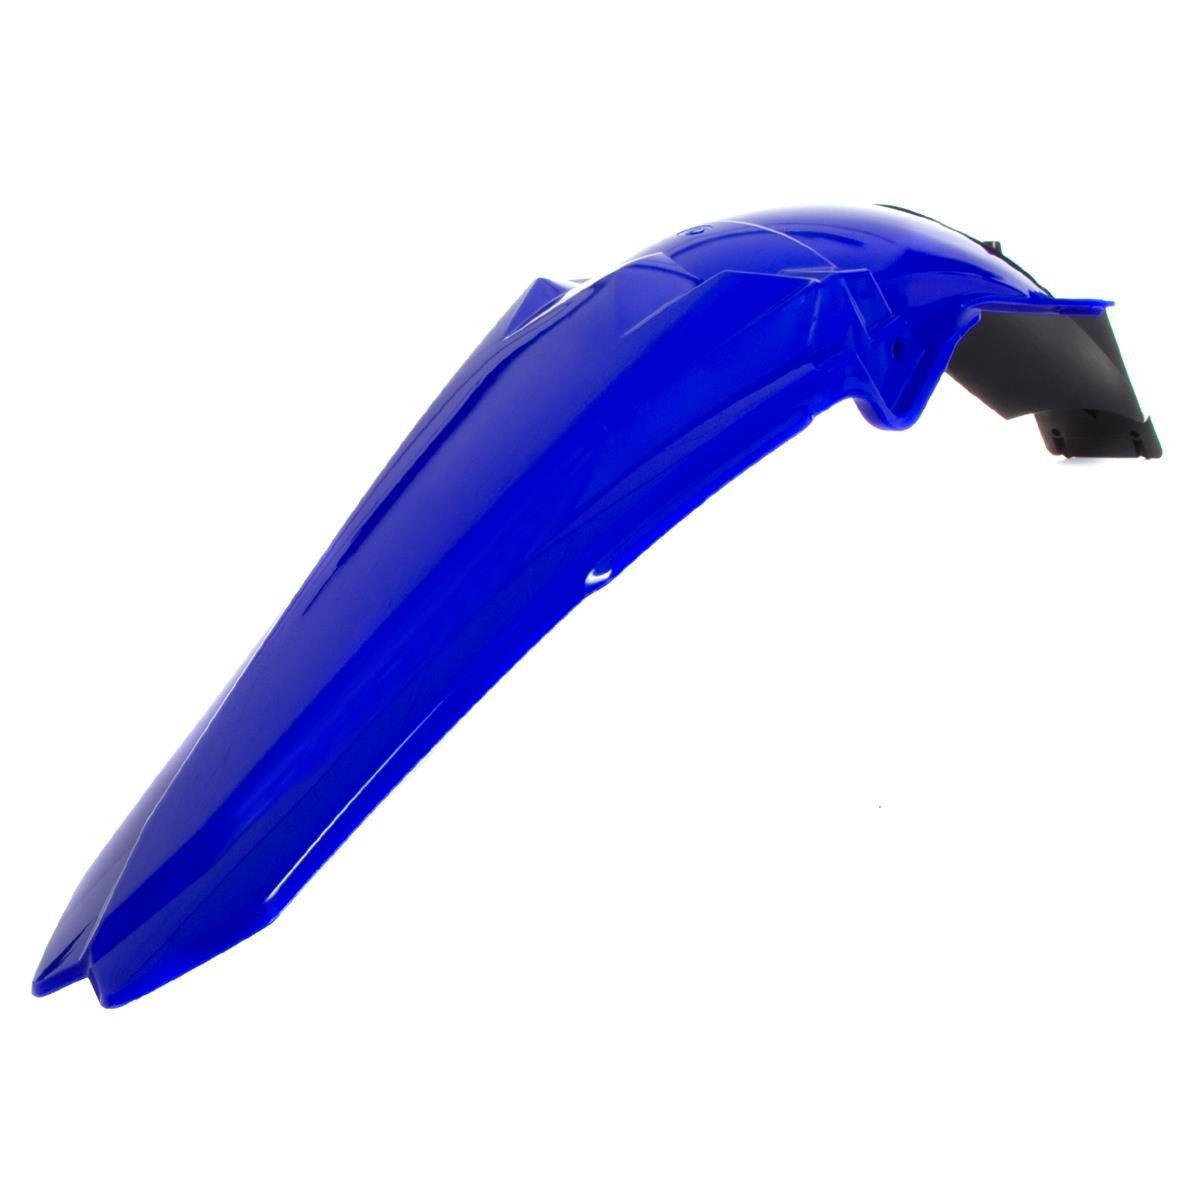 Acerbis Rear Fender  Yamaha YZF450 10-13, Blue/Black, With Shock Cover